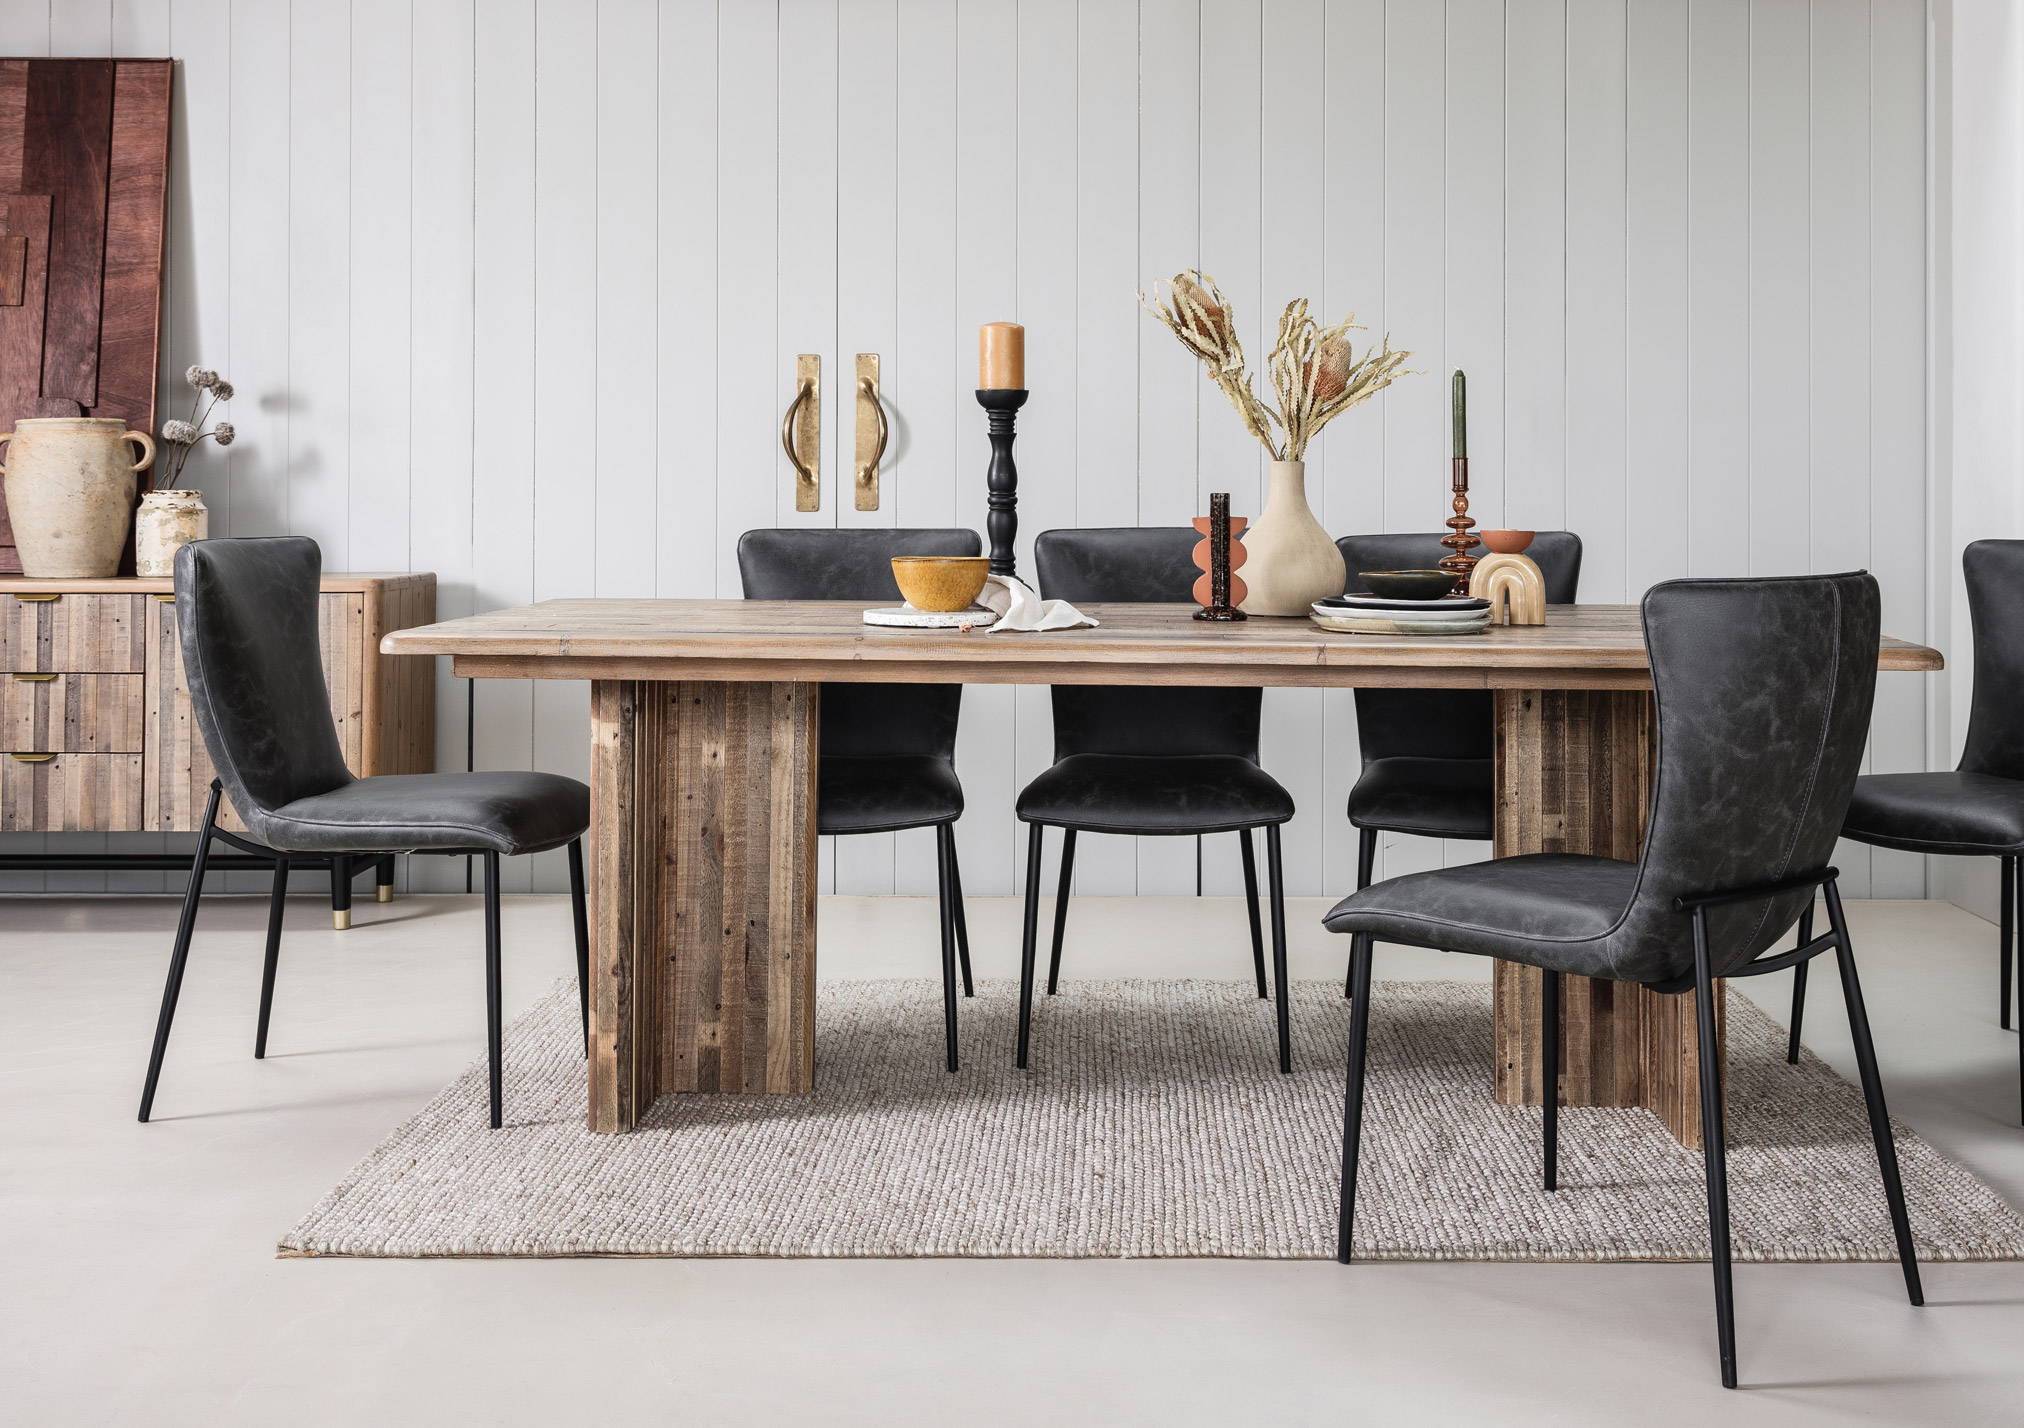 Widcombe Hill Natural Finish Dining Furniture